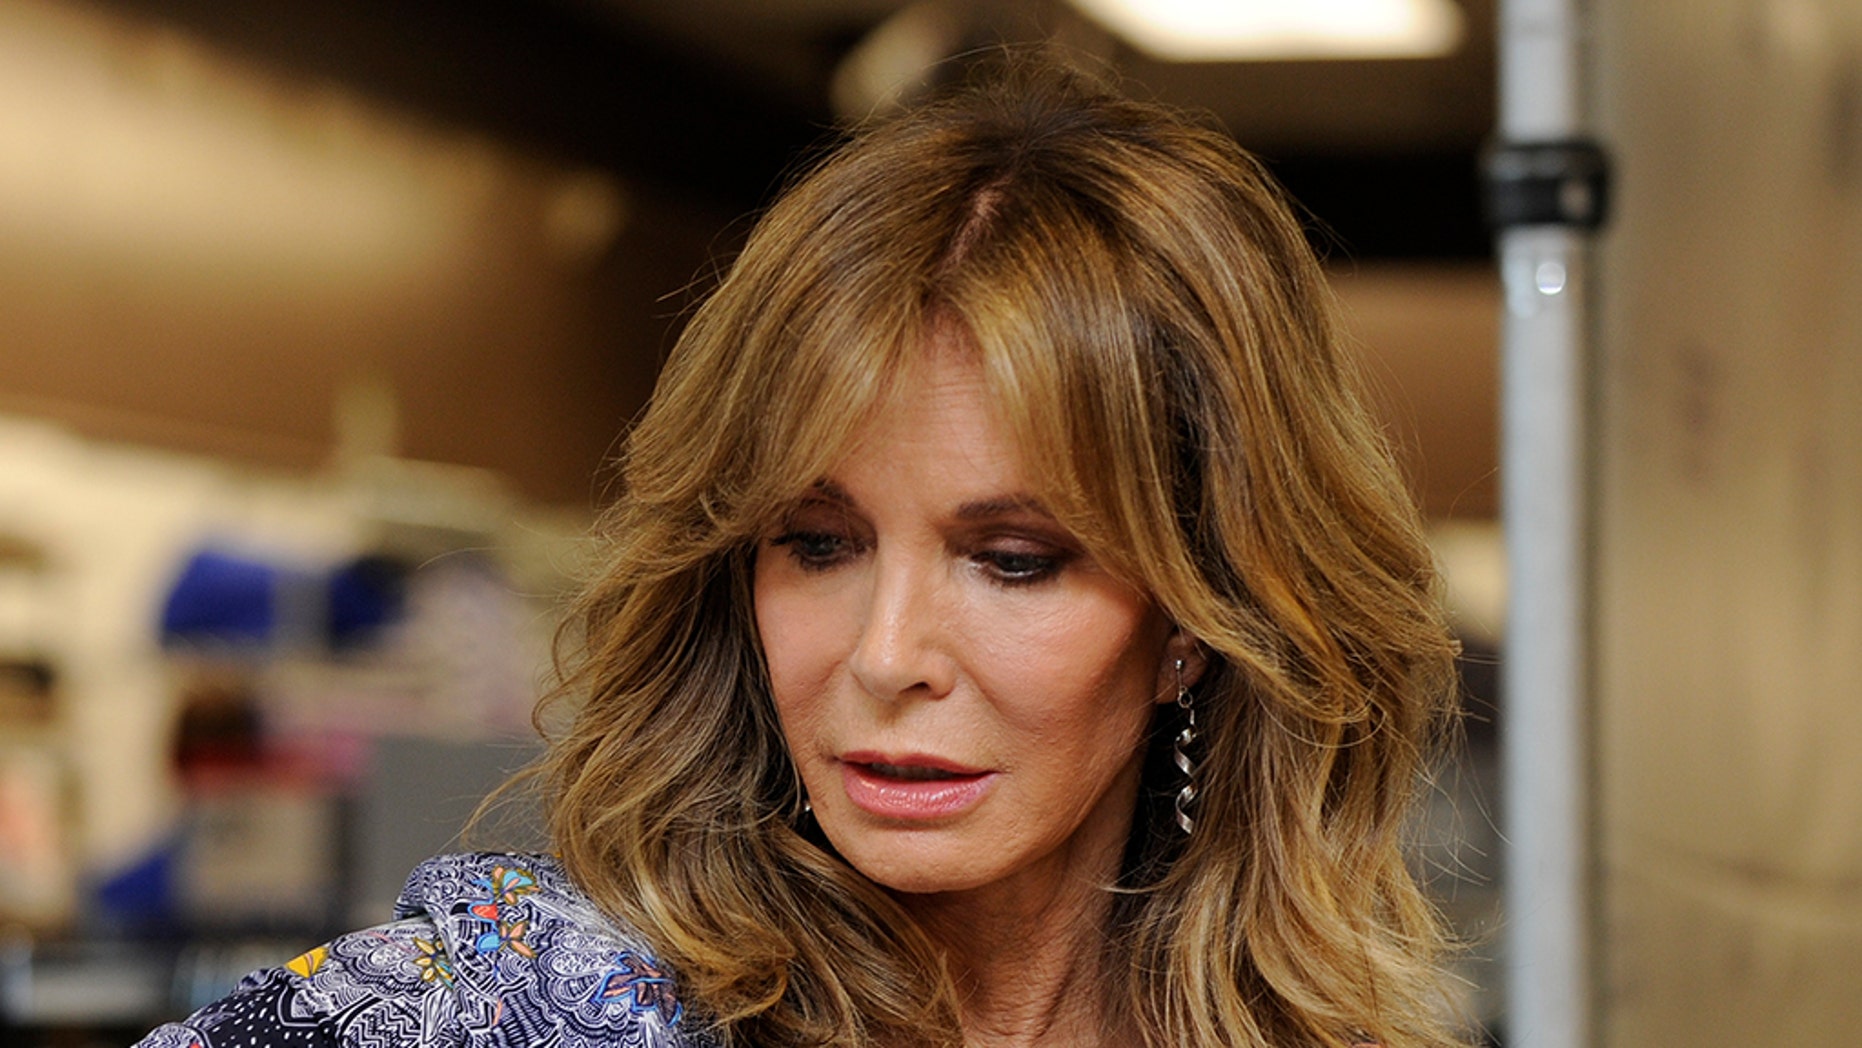 Charlie S Angels Star Jaclyn Smith Brought To Tears While Sharing.